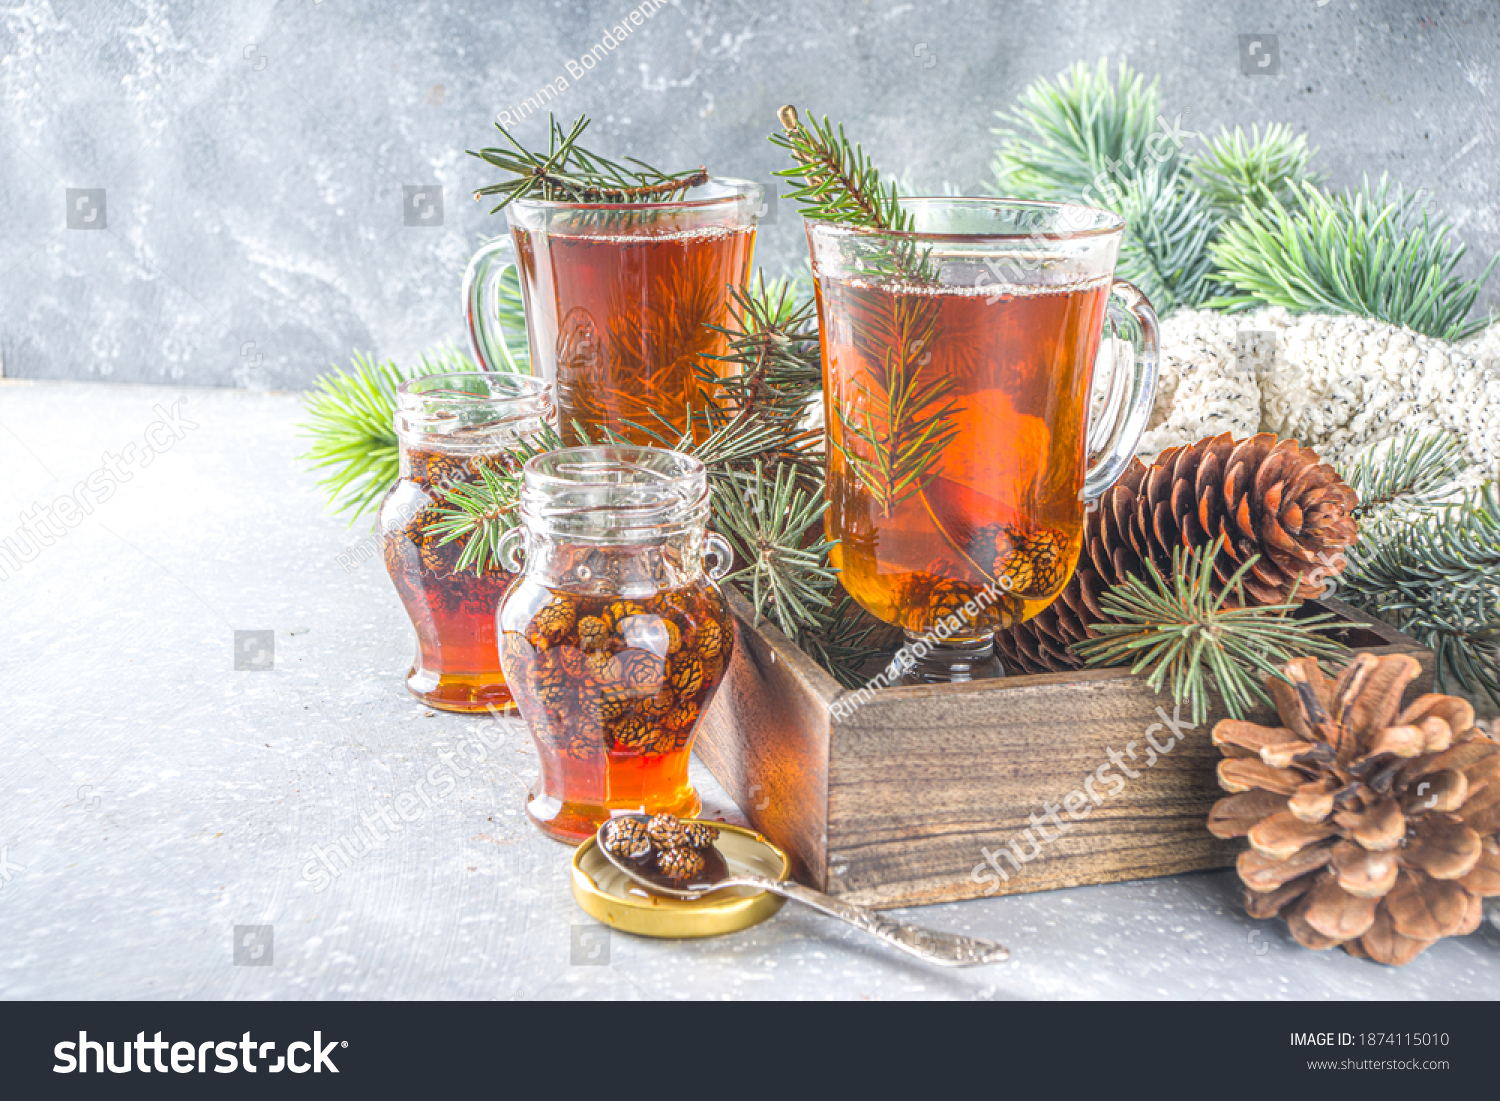 Pine Cone tea, aromatic organic winter hot tea drink with pine branch and pine cone jam, sweet and healthy winter drink concept #1874115010